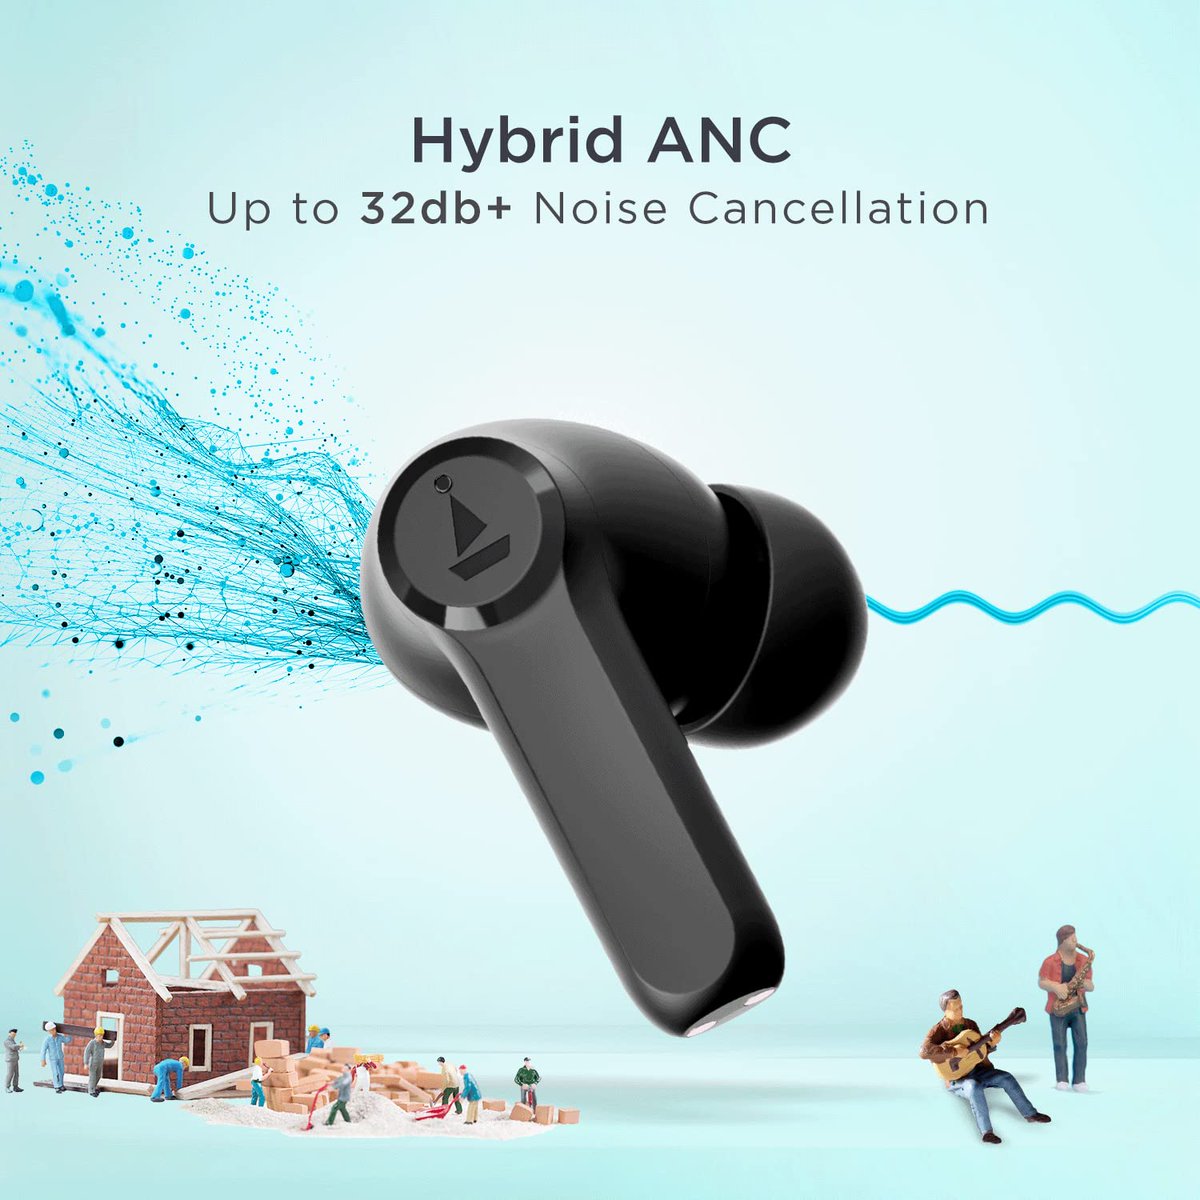 Rs 1,999 (60% off) on boAt Airdopes 393ANC True Wireless in Ear Earbuds
Deal (affiliate)- amzn.to/3Nbxx9e

#deal #sale #discount #offer #headphones #earphones #earbuds #tws #wireless #tech #gadget #smartphone